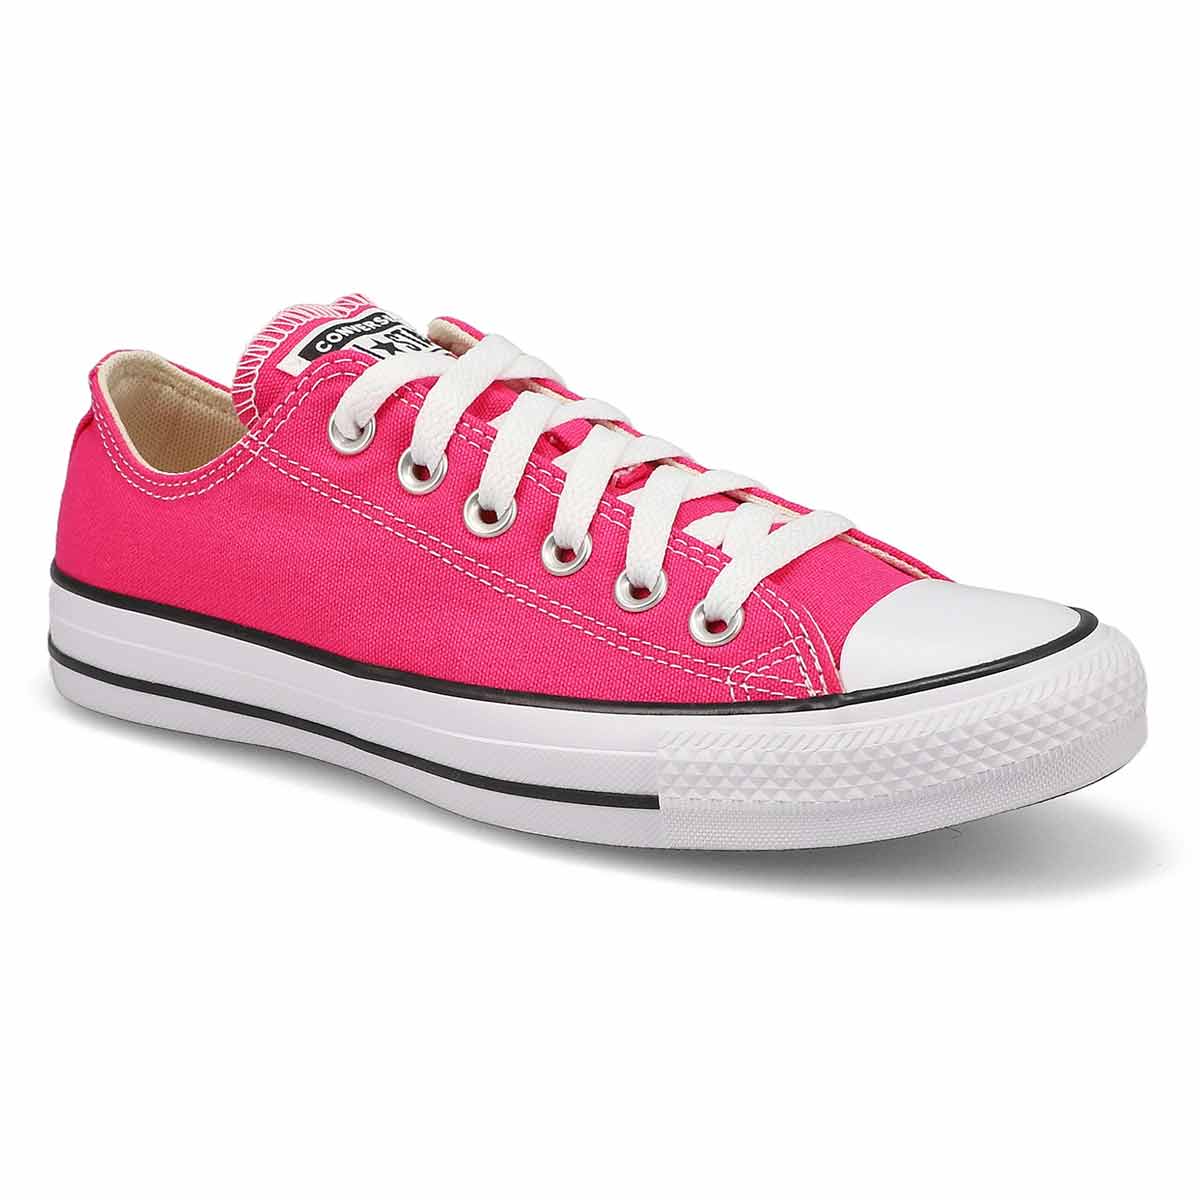 Ladies Chuck Taylor All Star Sneaker - Double Cyan